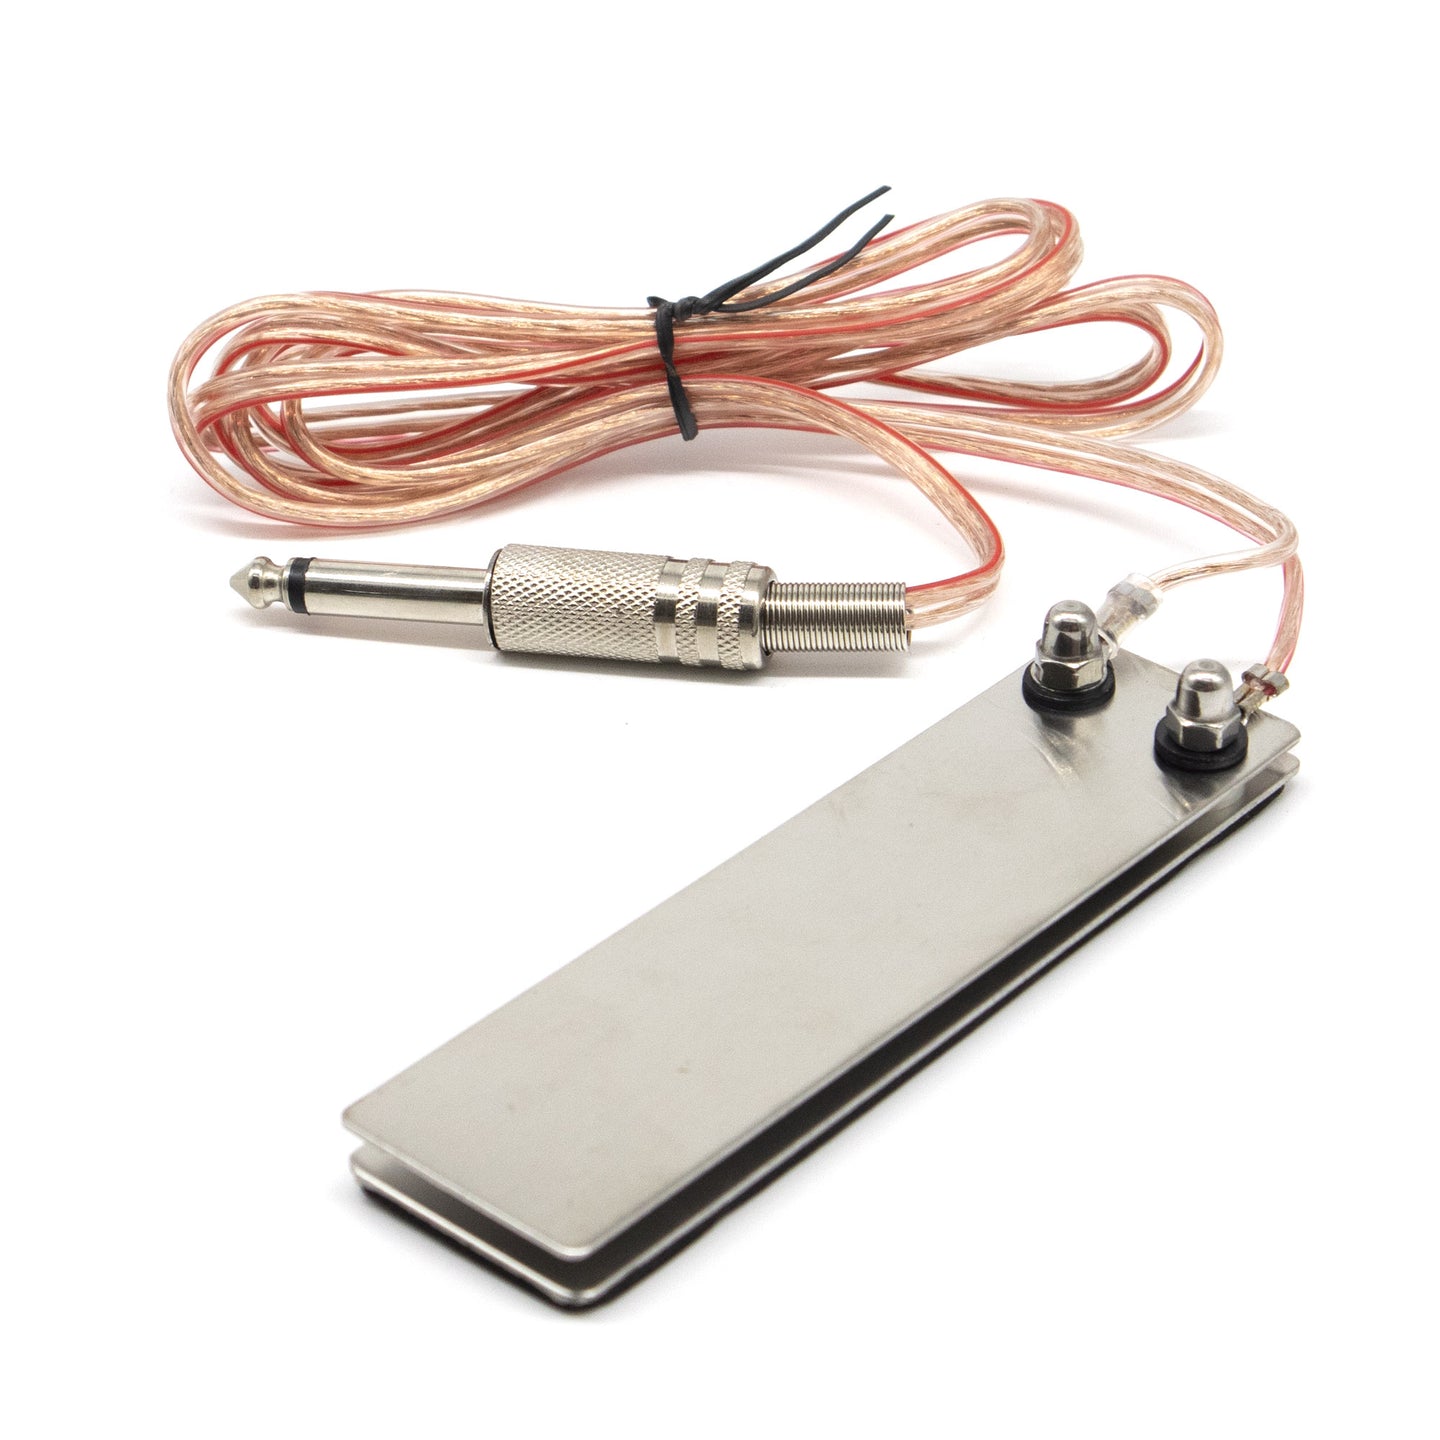 Flat stainless steel foot pedal